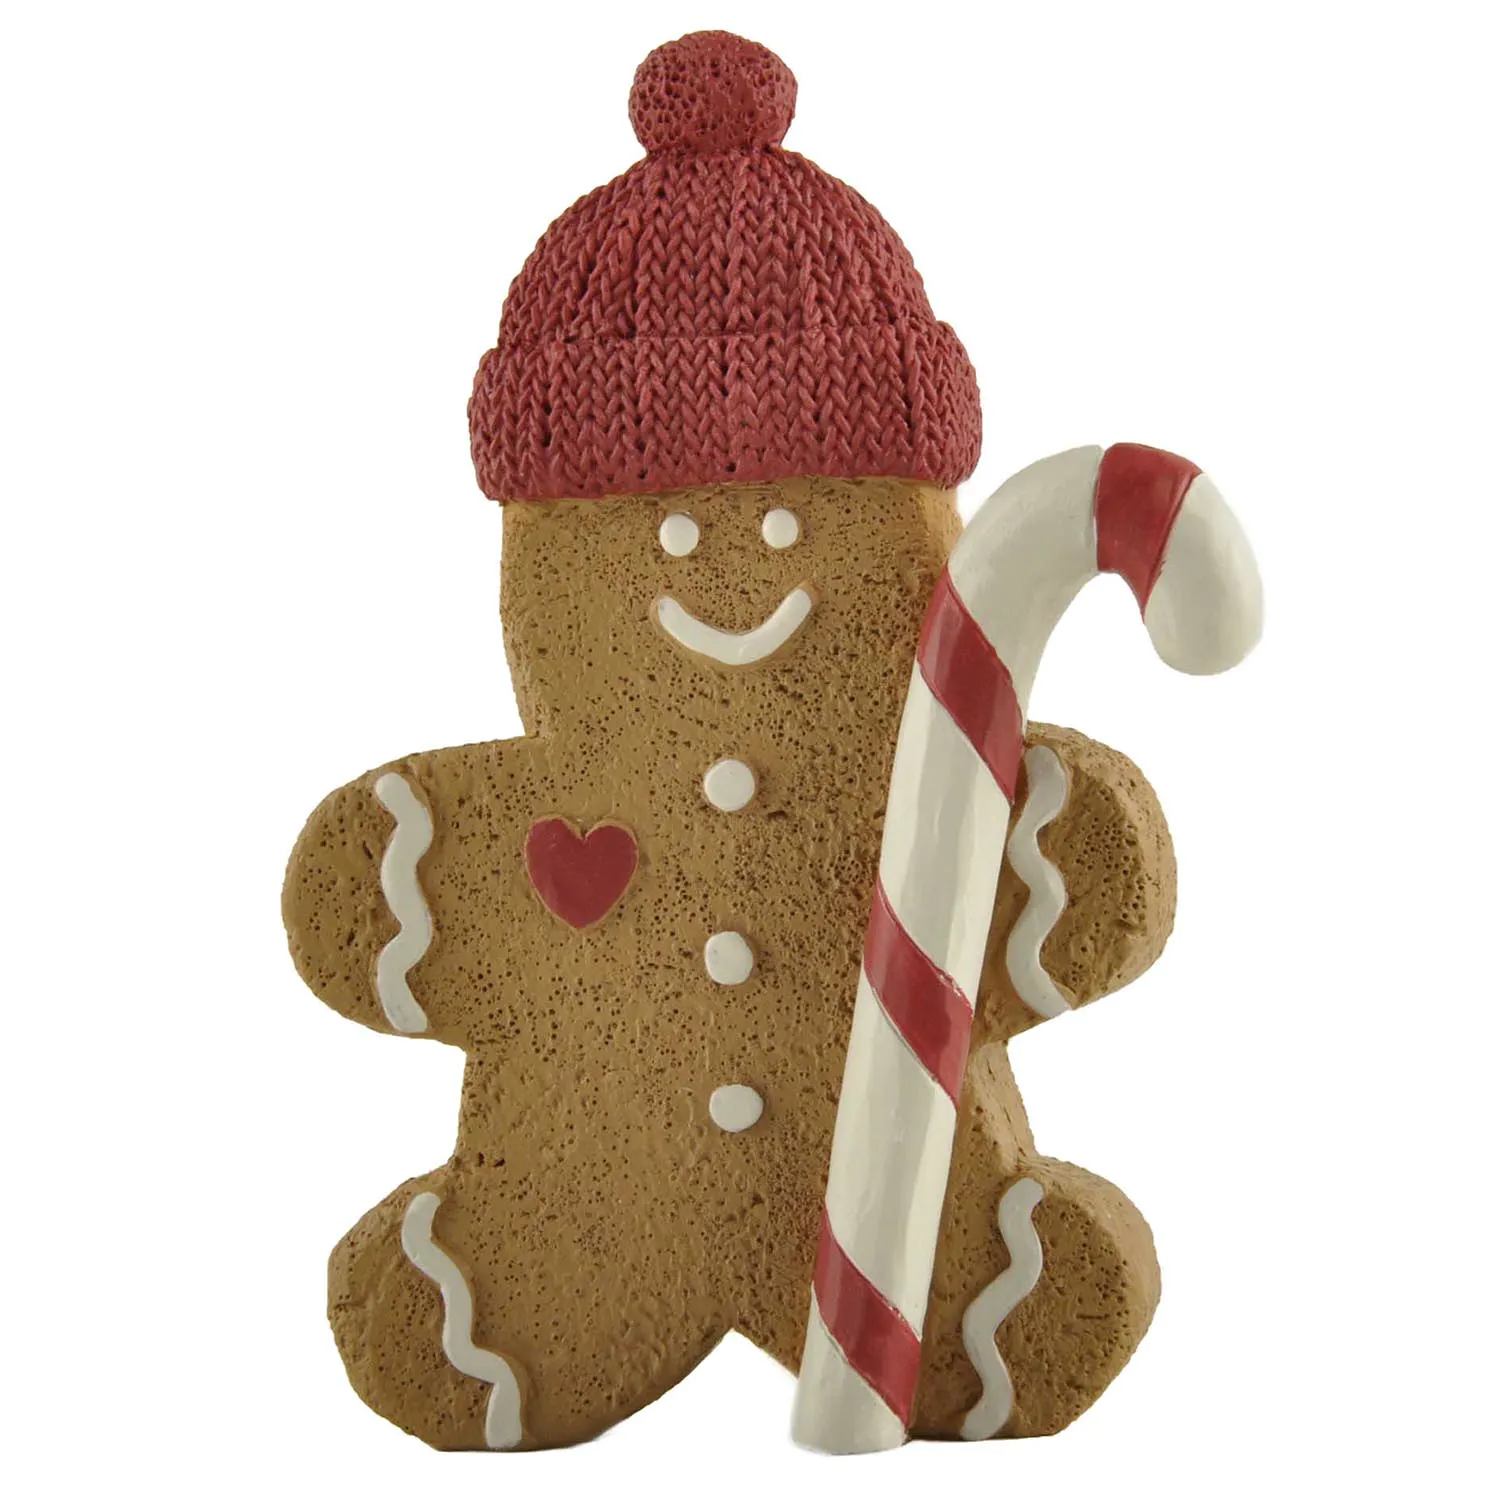 Factory Handemade Resin Christmas Crafts Gingerbread Man w Candy Cane for Home Decor 238-13745